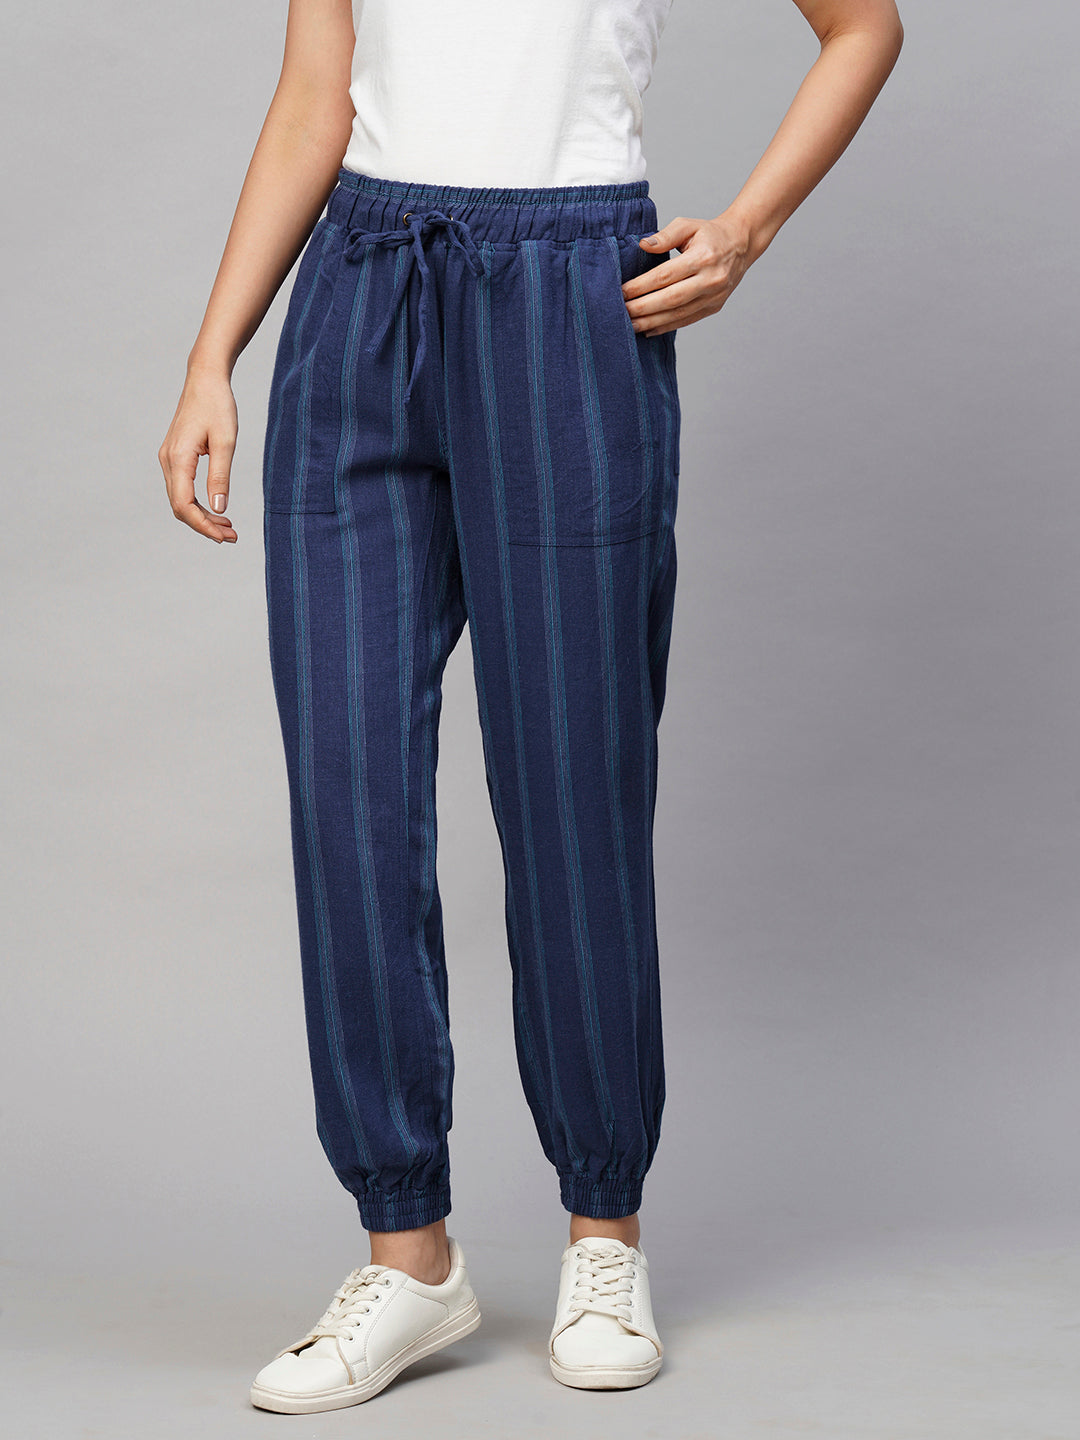 These Comfy Lee Dress Pants Are on Sale for $26 at Amazon